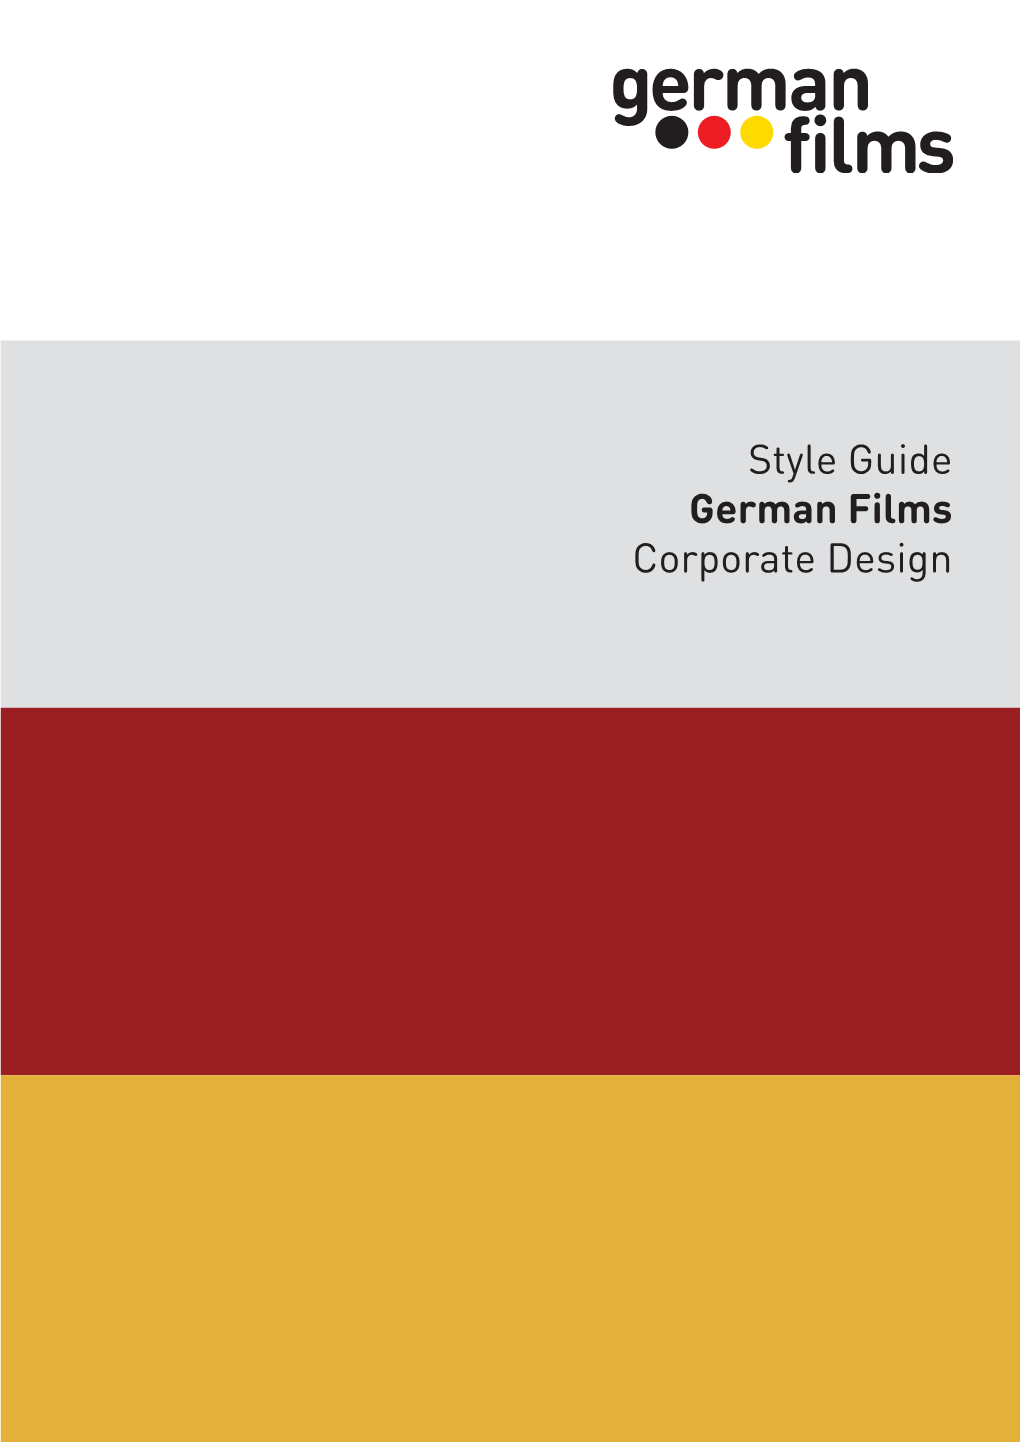 Style Guide German Films Corporate Design 2 Introduction